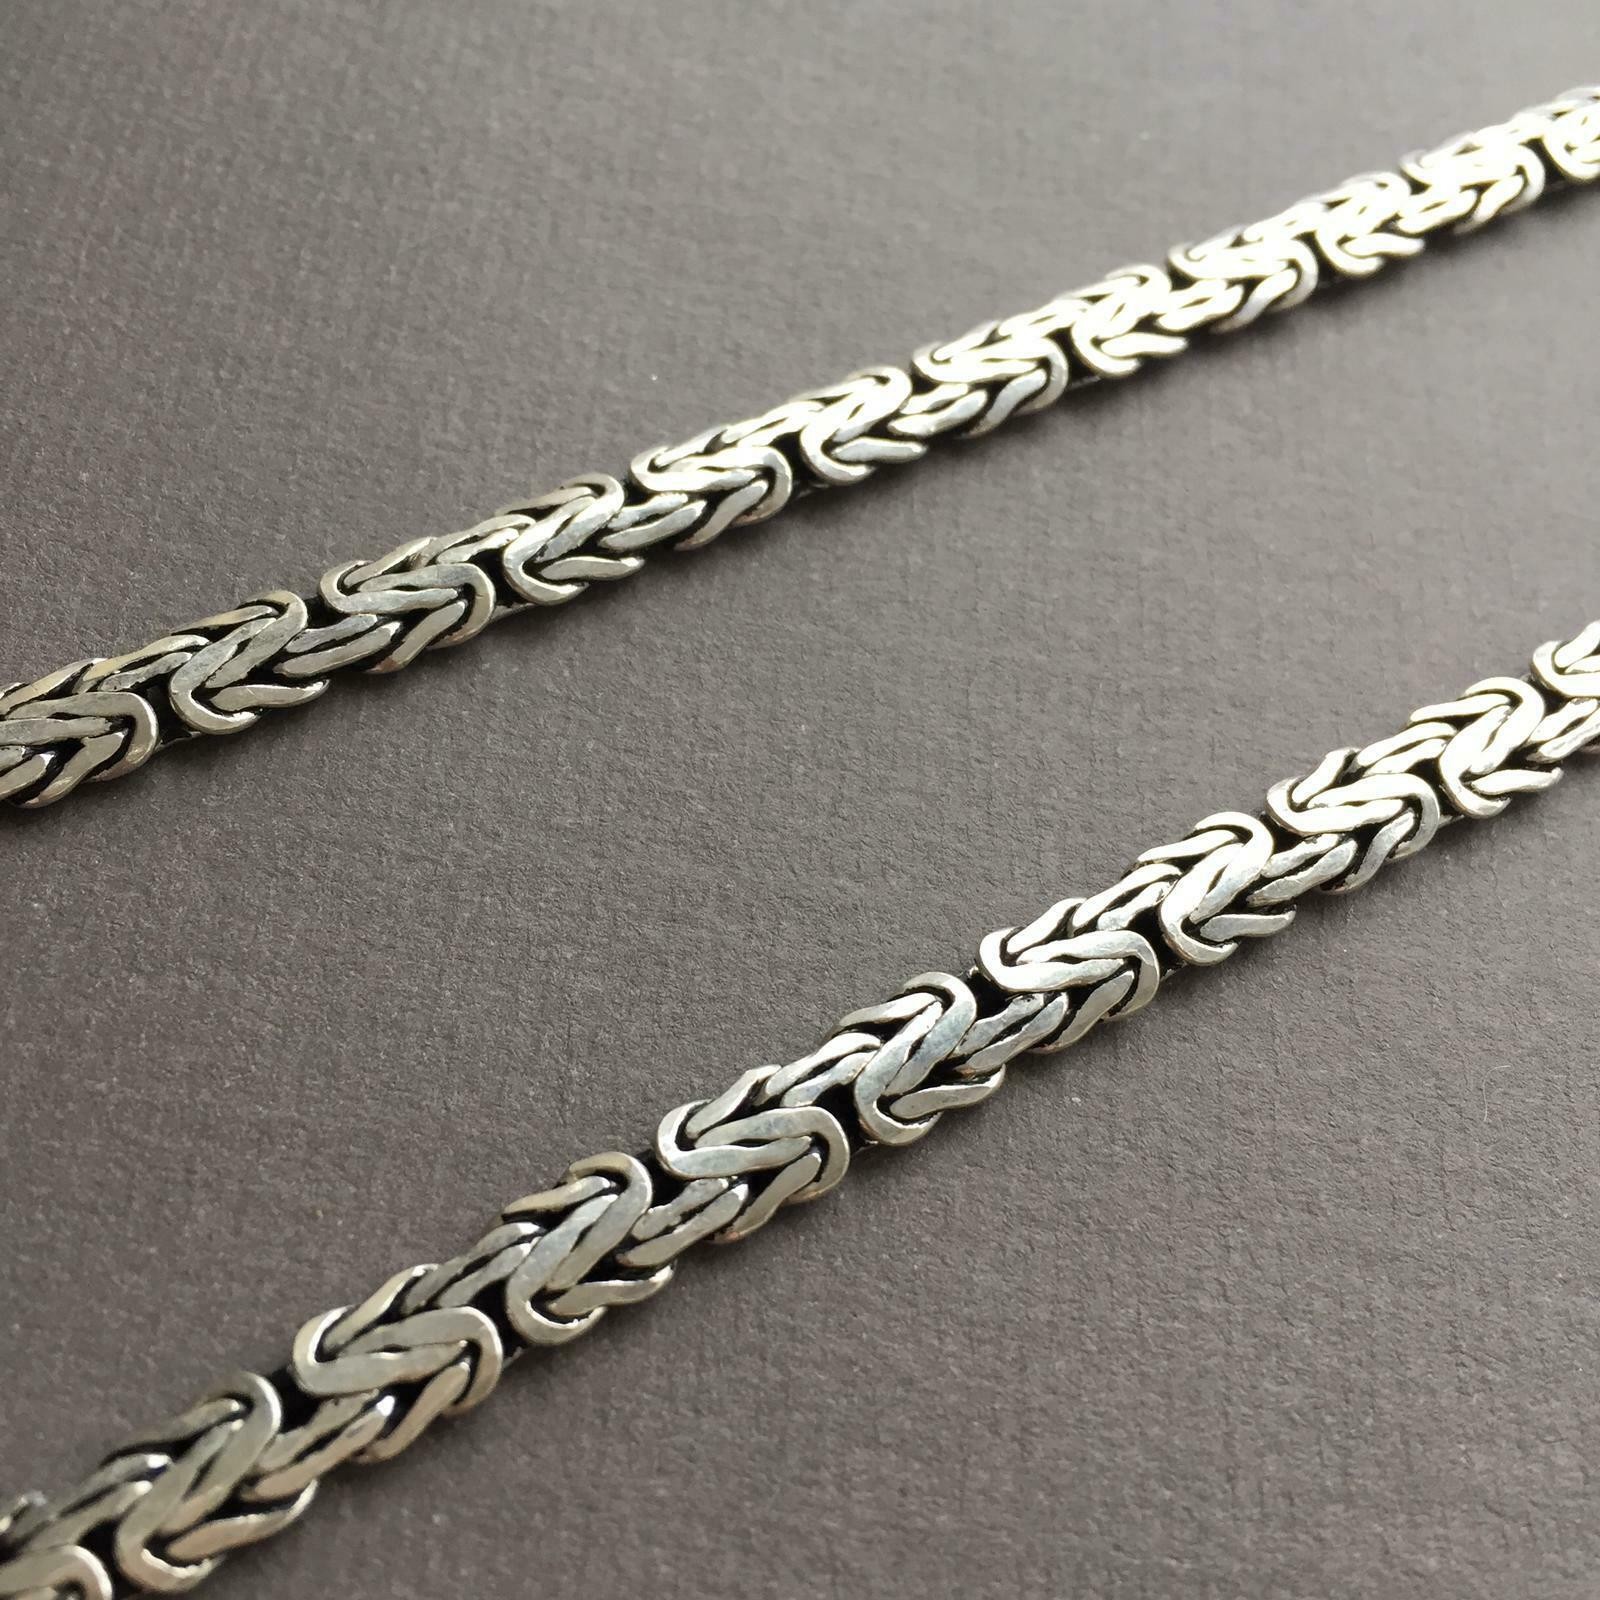 65 Cm / 26 In Mens Bali King Byzantine Chain Necklace 925 Sterling Silver - Image 2 of 4